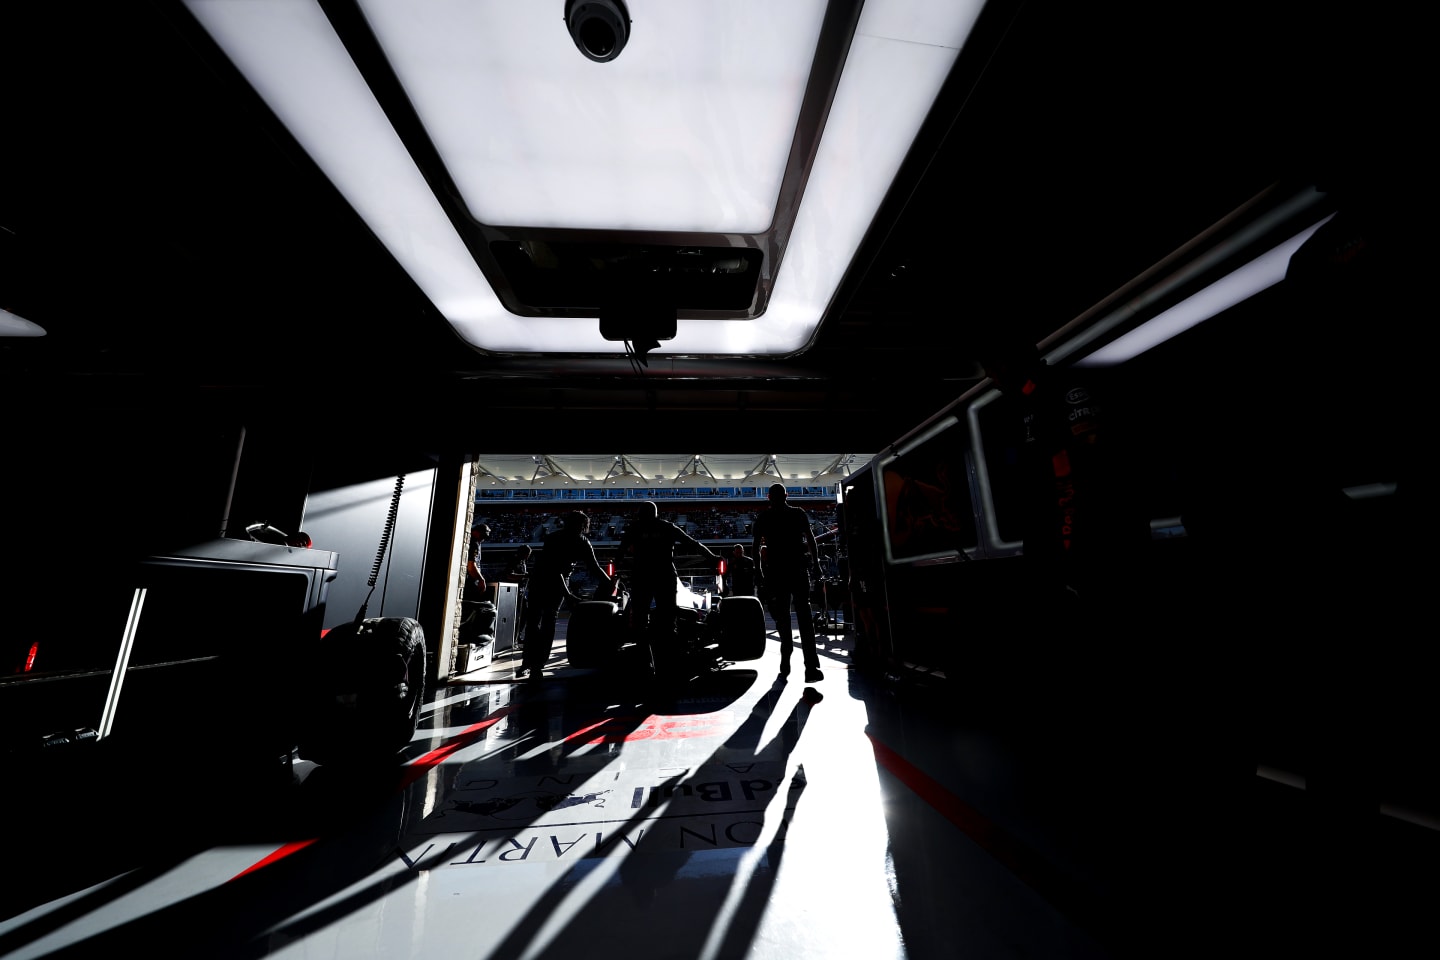 AUSTIN, TEXAS - NOVEMBER 02: The Red Bull Racing garage is picturd during qualifying for the F1 Grand Prix of USA at Circuit of The Americas on November 02, 2019 in Austin, Texas. (Photo by Mark Thompson/Getty Images)